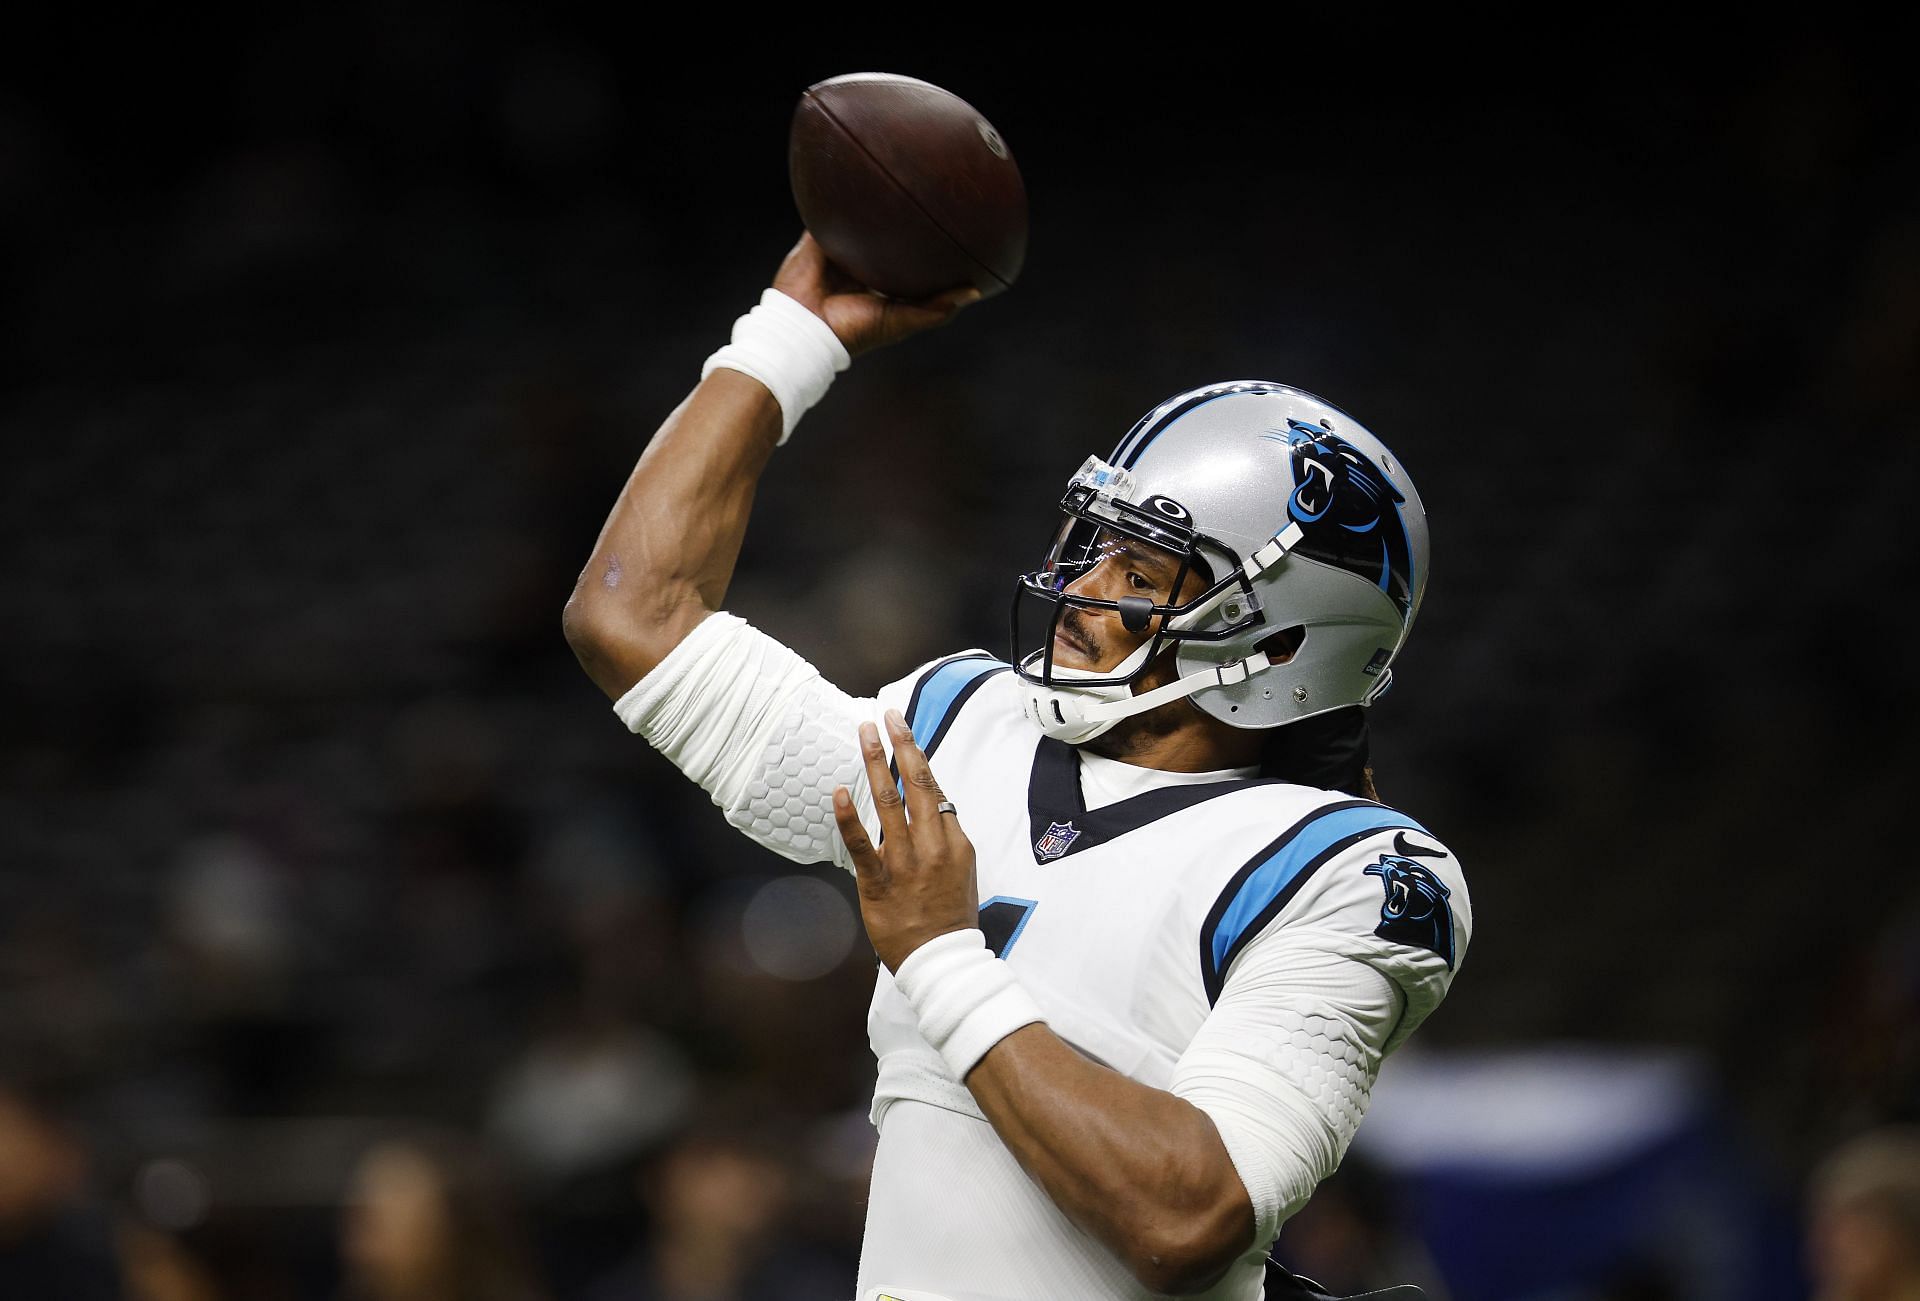 Cam Newton found himself in hot water after making controversial comments about women